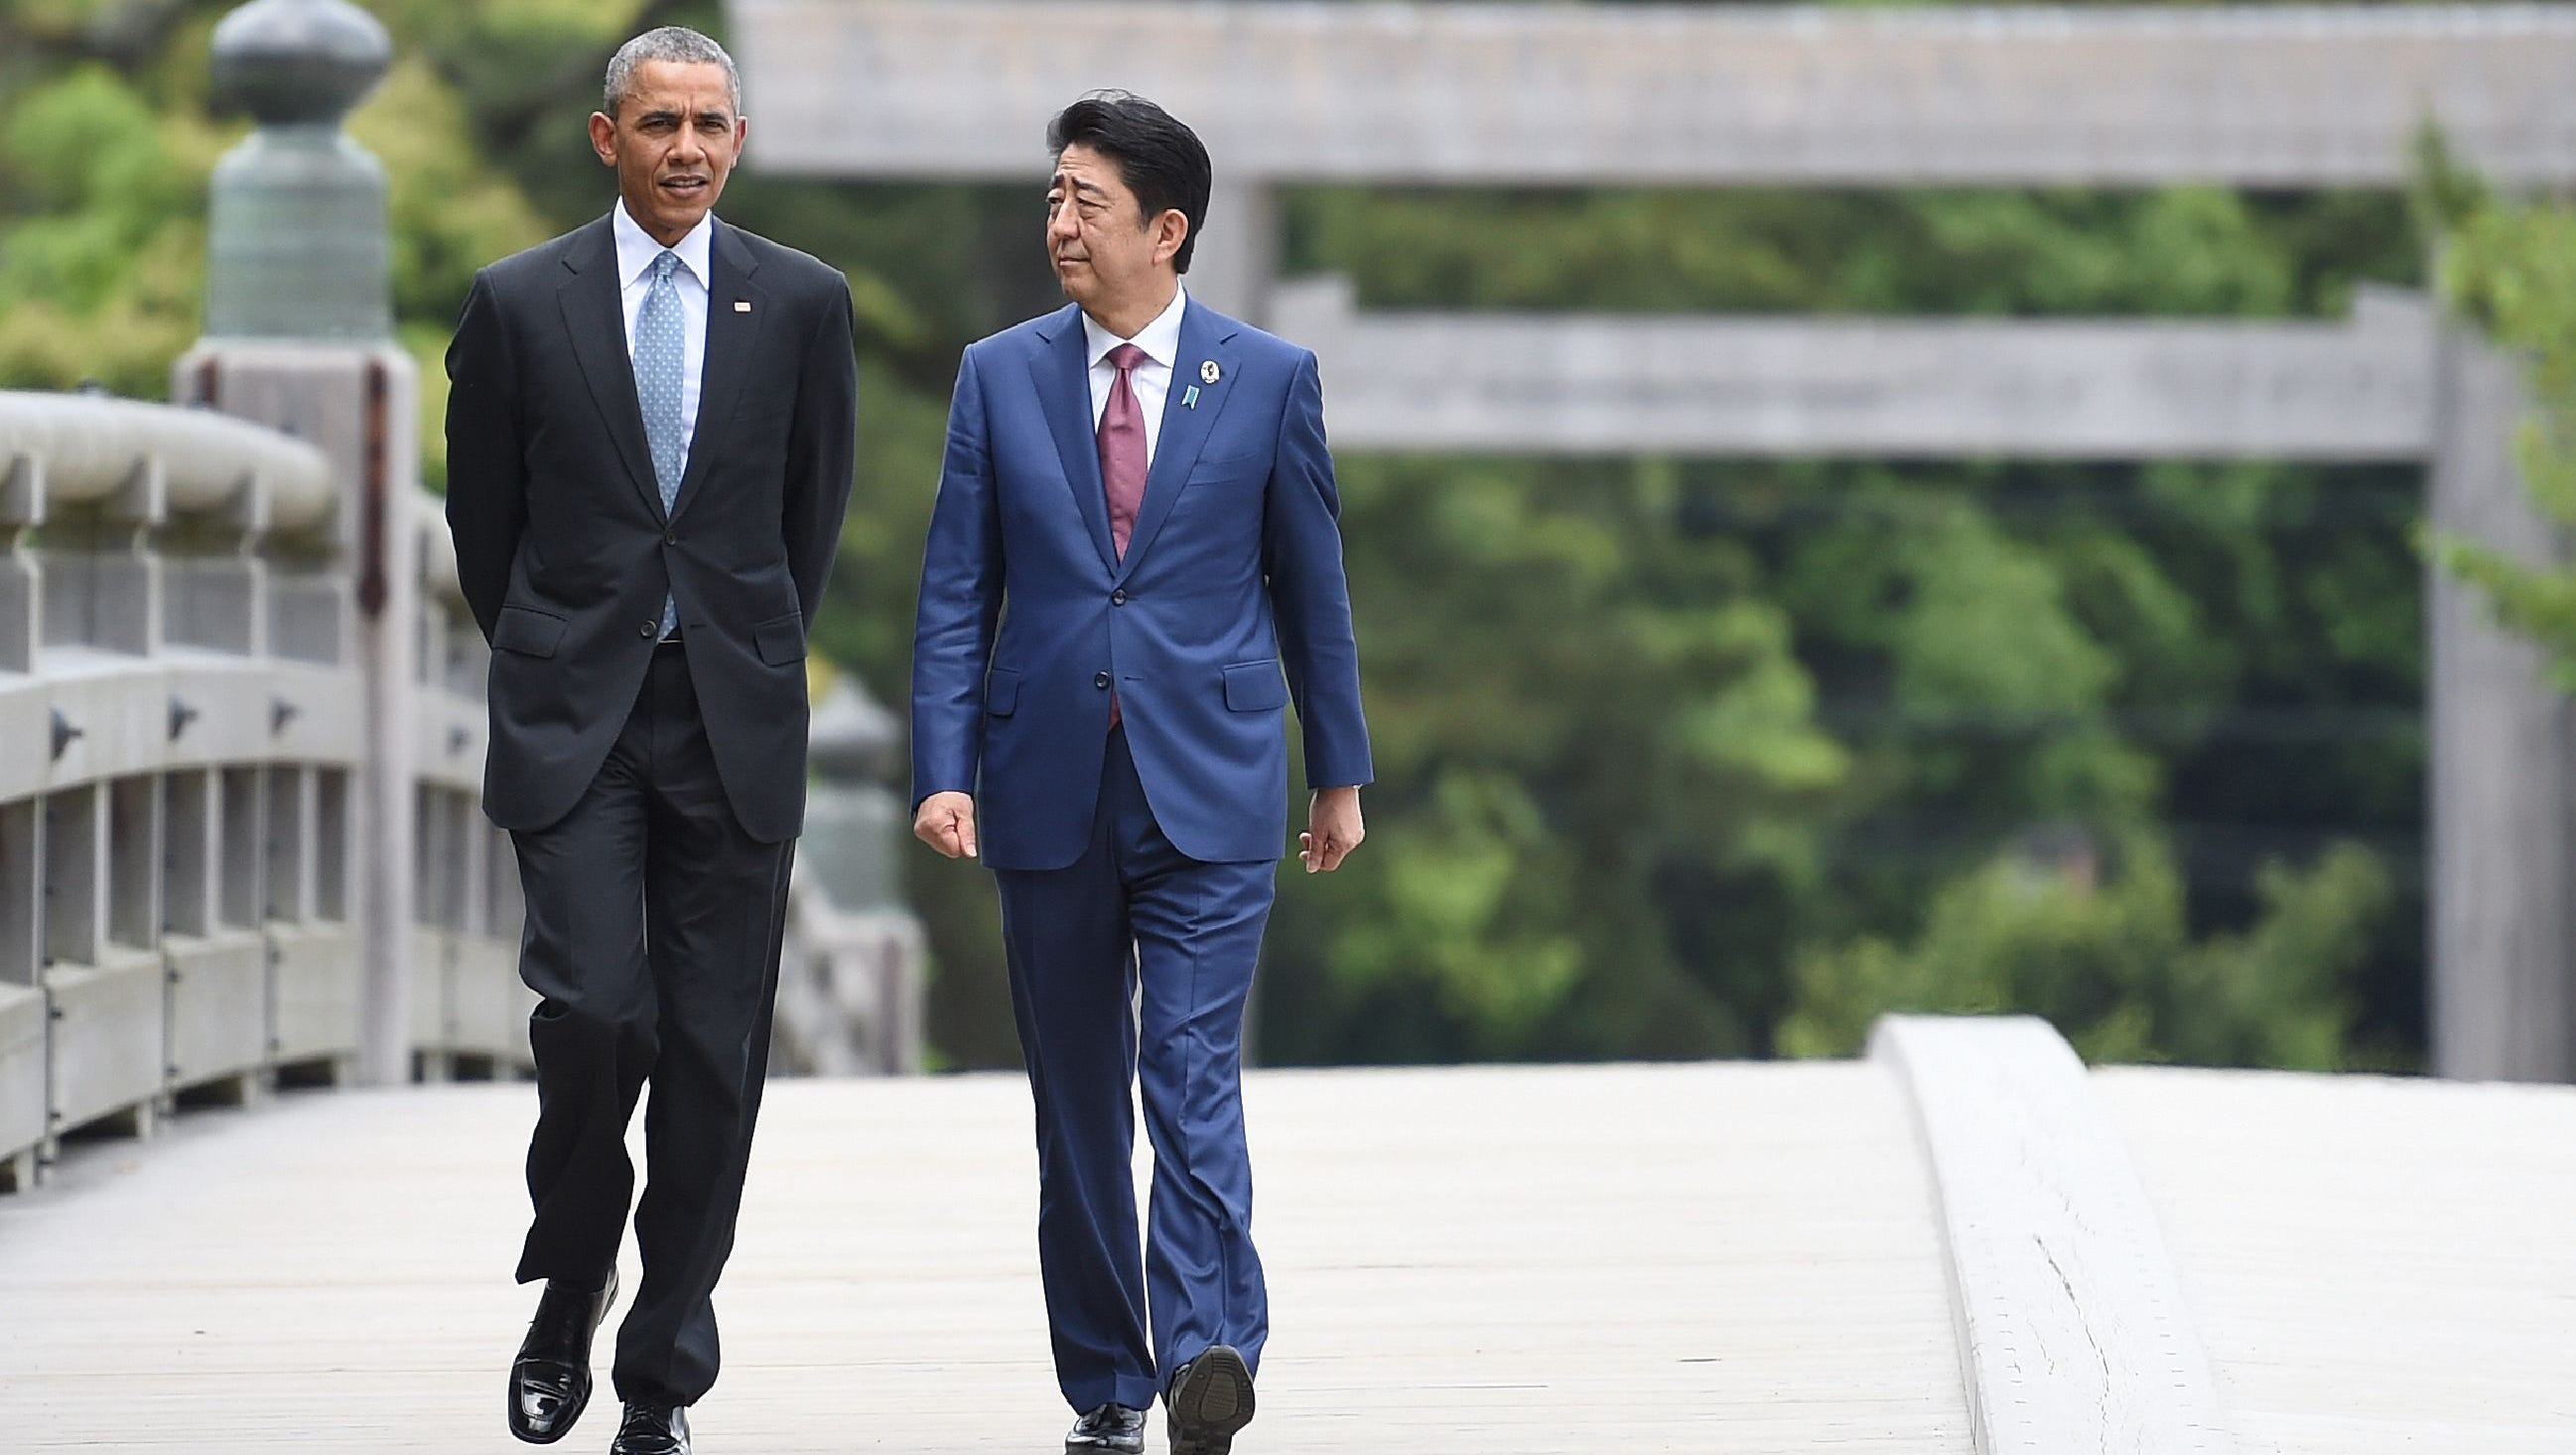 Obama Abe To Visit Pearl Harbor Together First Official Japanese Visit